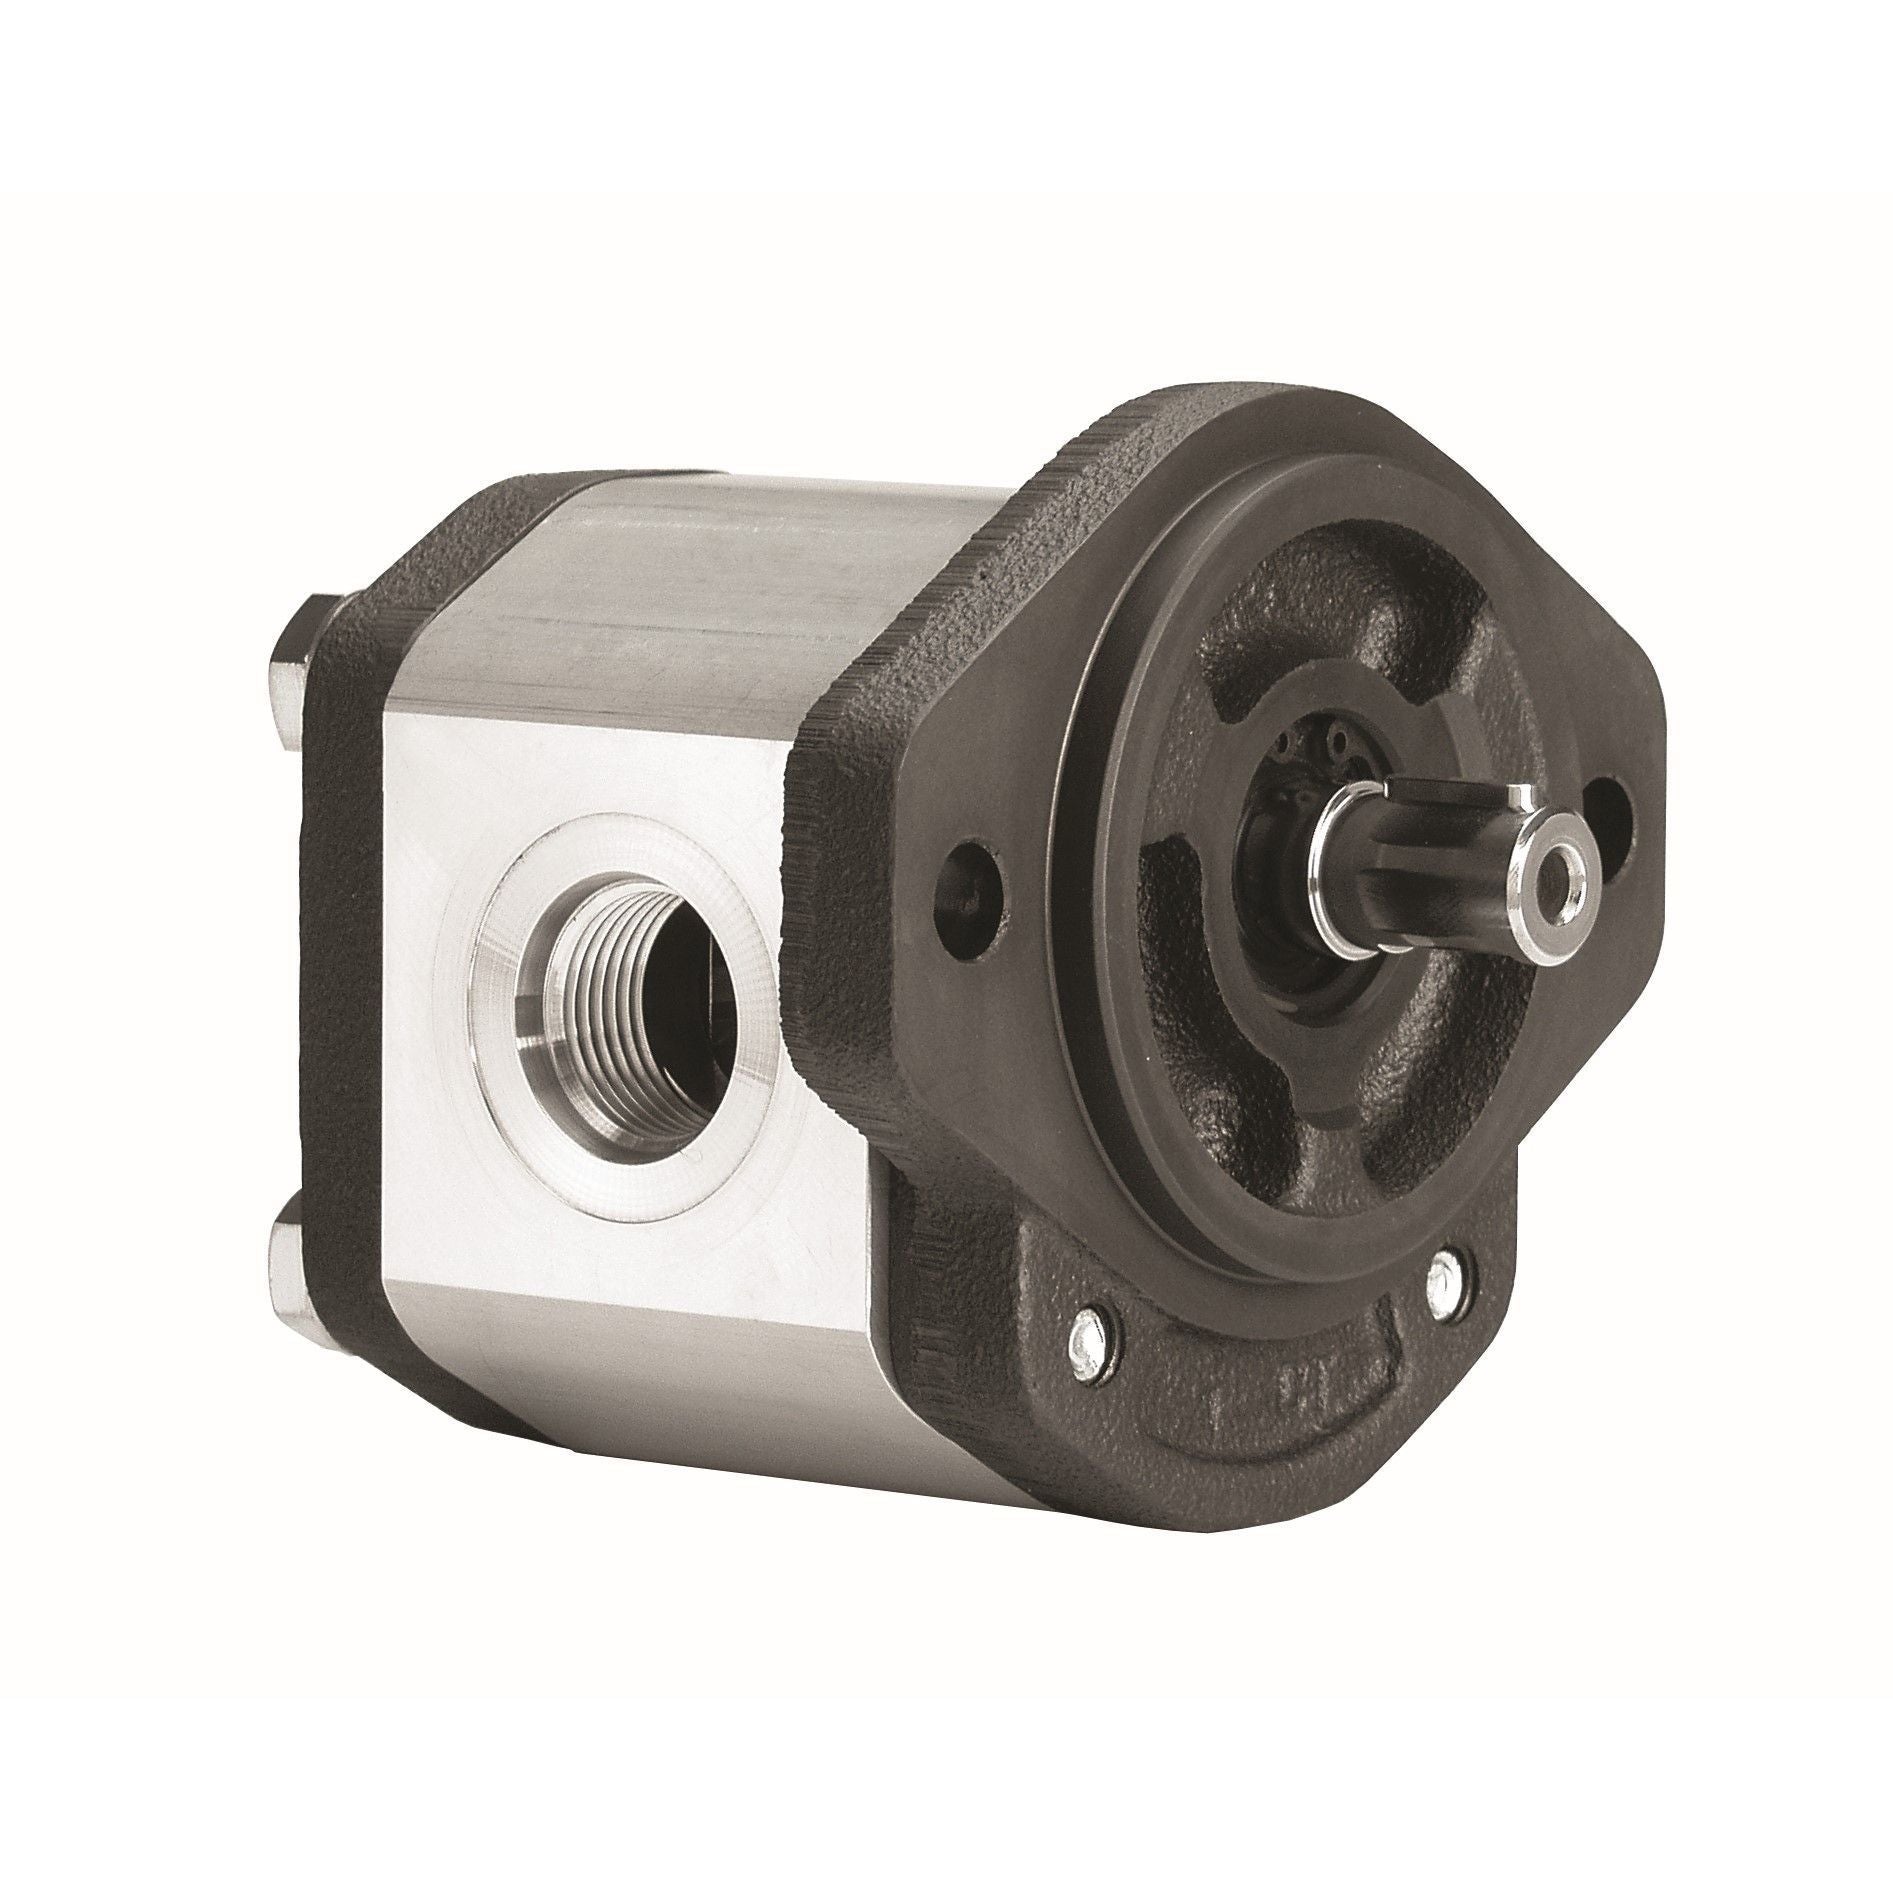 GHP2A-D-40 : Marzocchi Gear Pump, CW, 28.2cc (1.7202in3), 13.4 GPM, 2900psi, 1800 RPM, #12 SAE (3/4") In, #10 SAE (5/8") Out, Keyed Shaft 5/8" Bore x 5/32" Key, SAE A 2-Bolt Mount